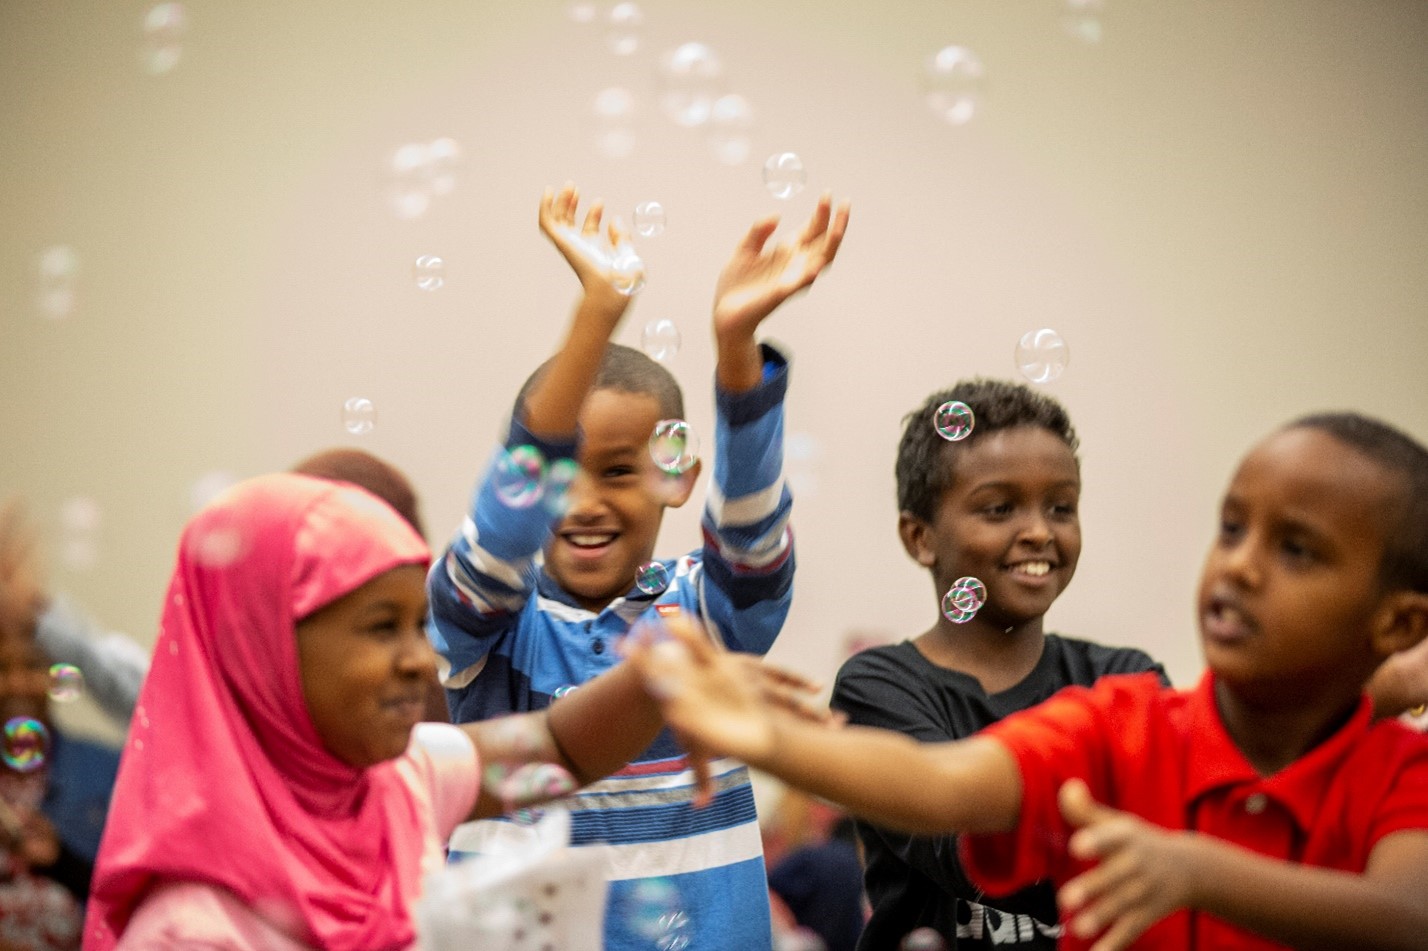 Somali children playing with bubbles at a library event.